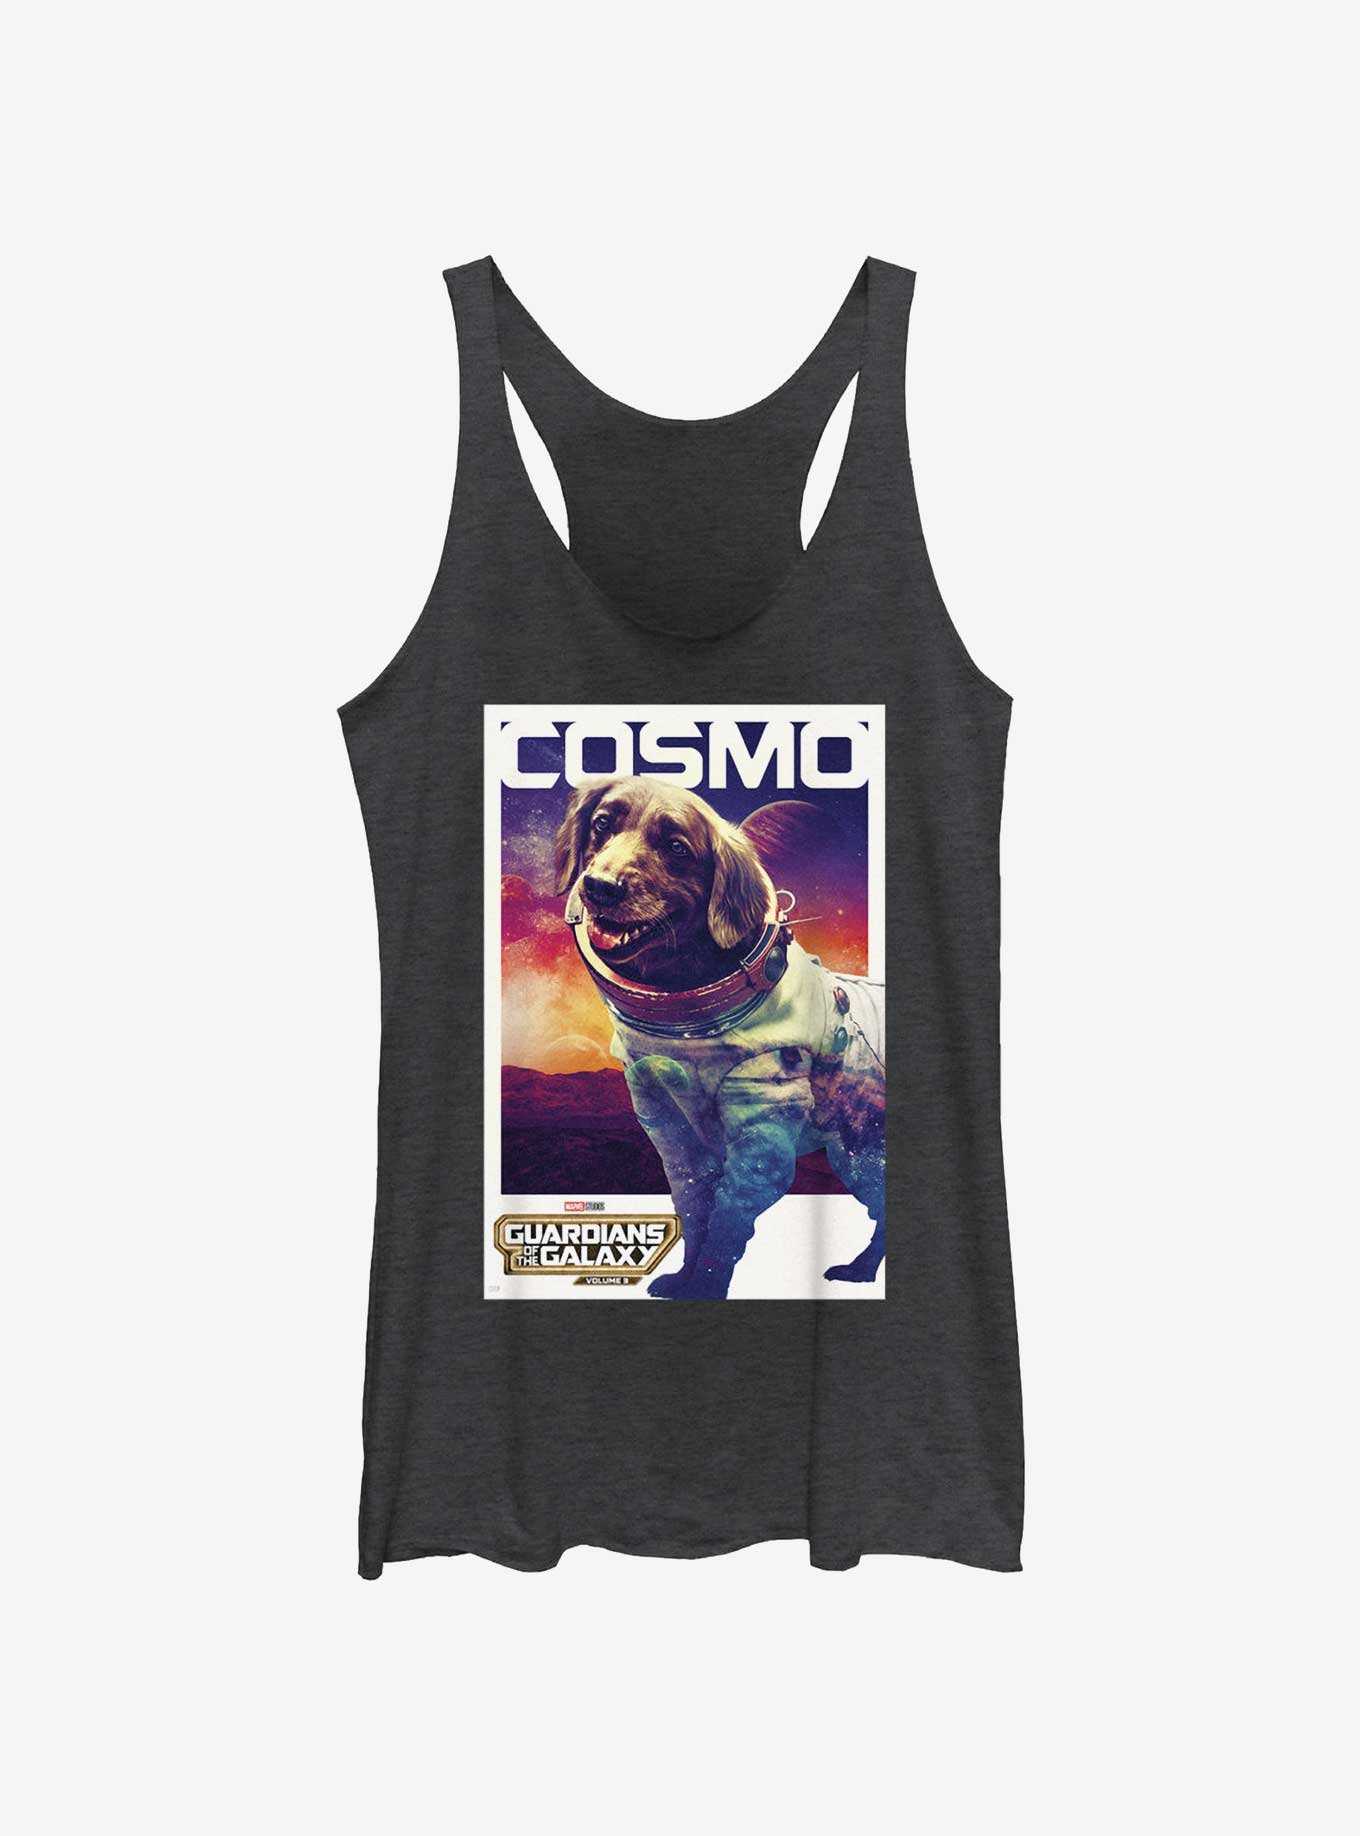 Guardians Of The Galaxy Vol. 3 Cosmo Poster Womens Tank Top, , hi-res